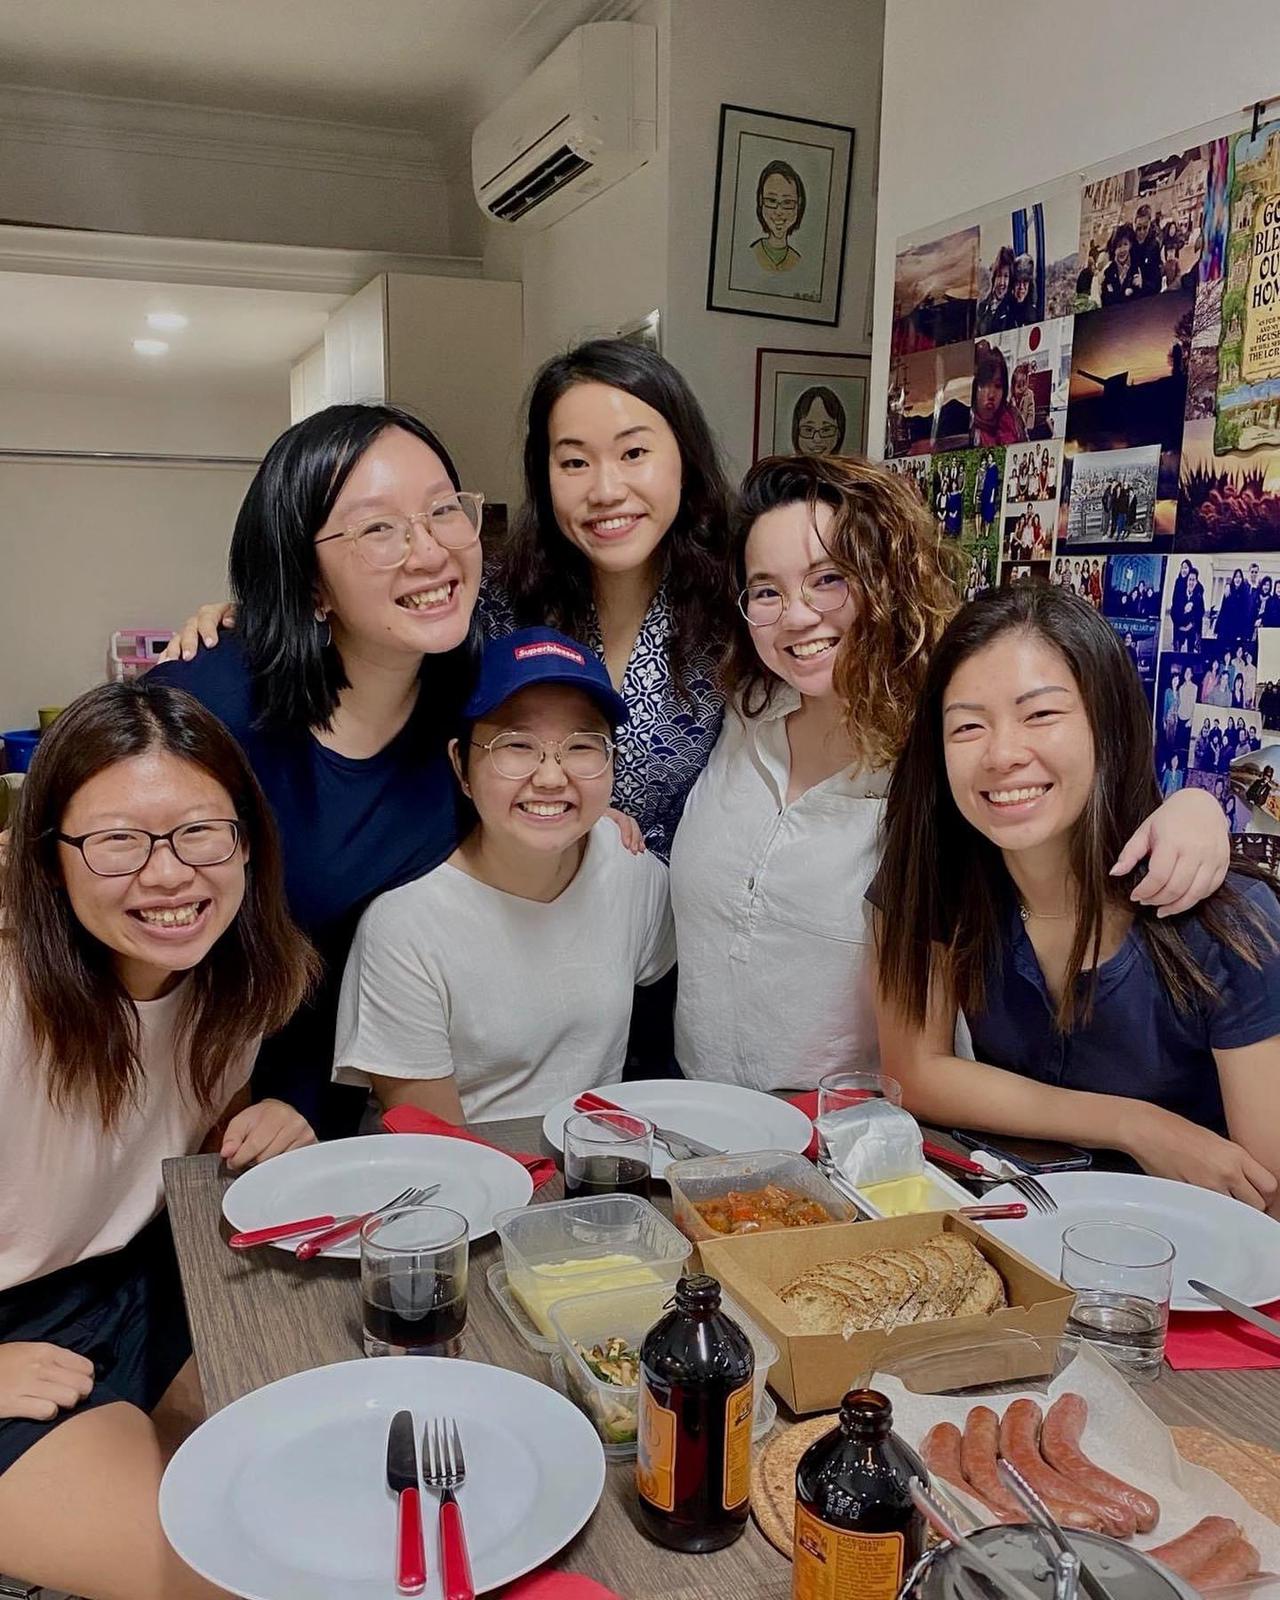 Chan (with cap) has a close, supportive circle of friends who have surrounded her with love and practical help. She is seen here with the closest of her girl friends dubbed "the sisterhood".